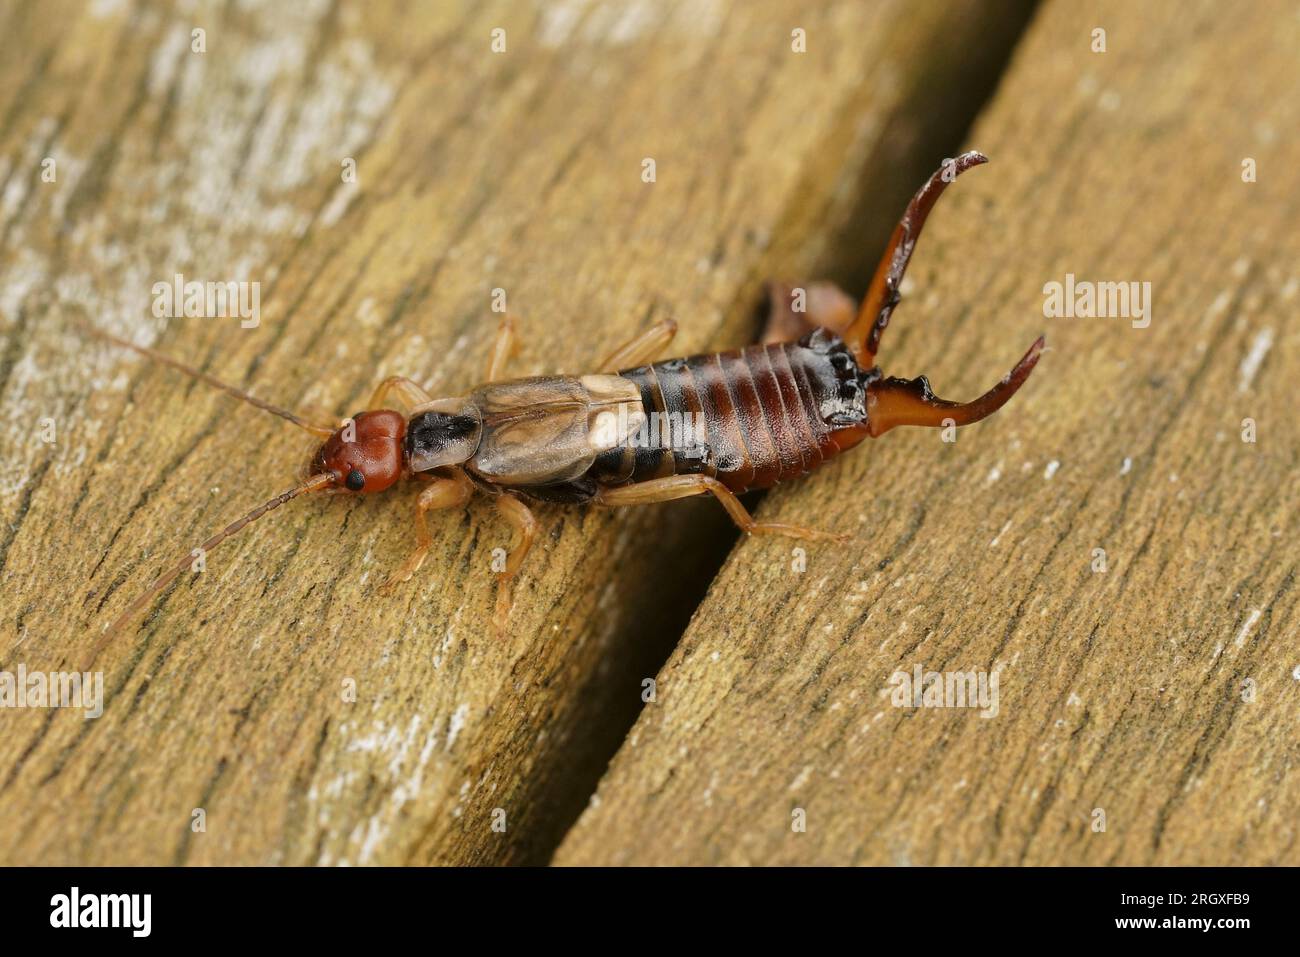 Natural detailed closeup on an adulty colored European common earwig, Forficula auricularia, sitting on wood Stock Photo